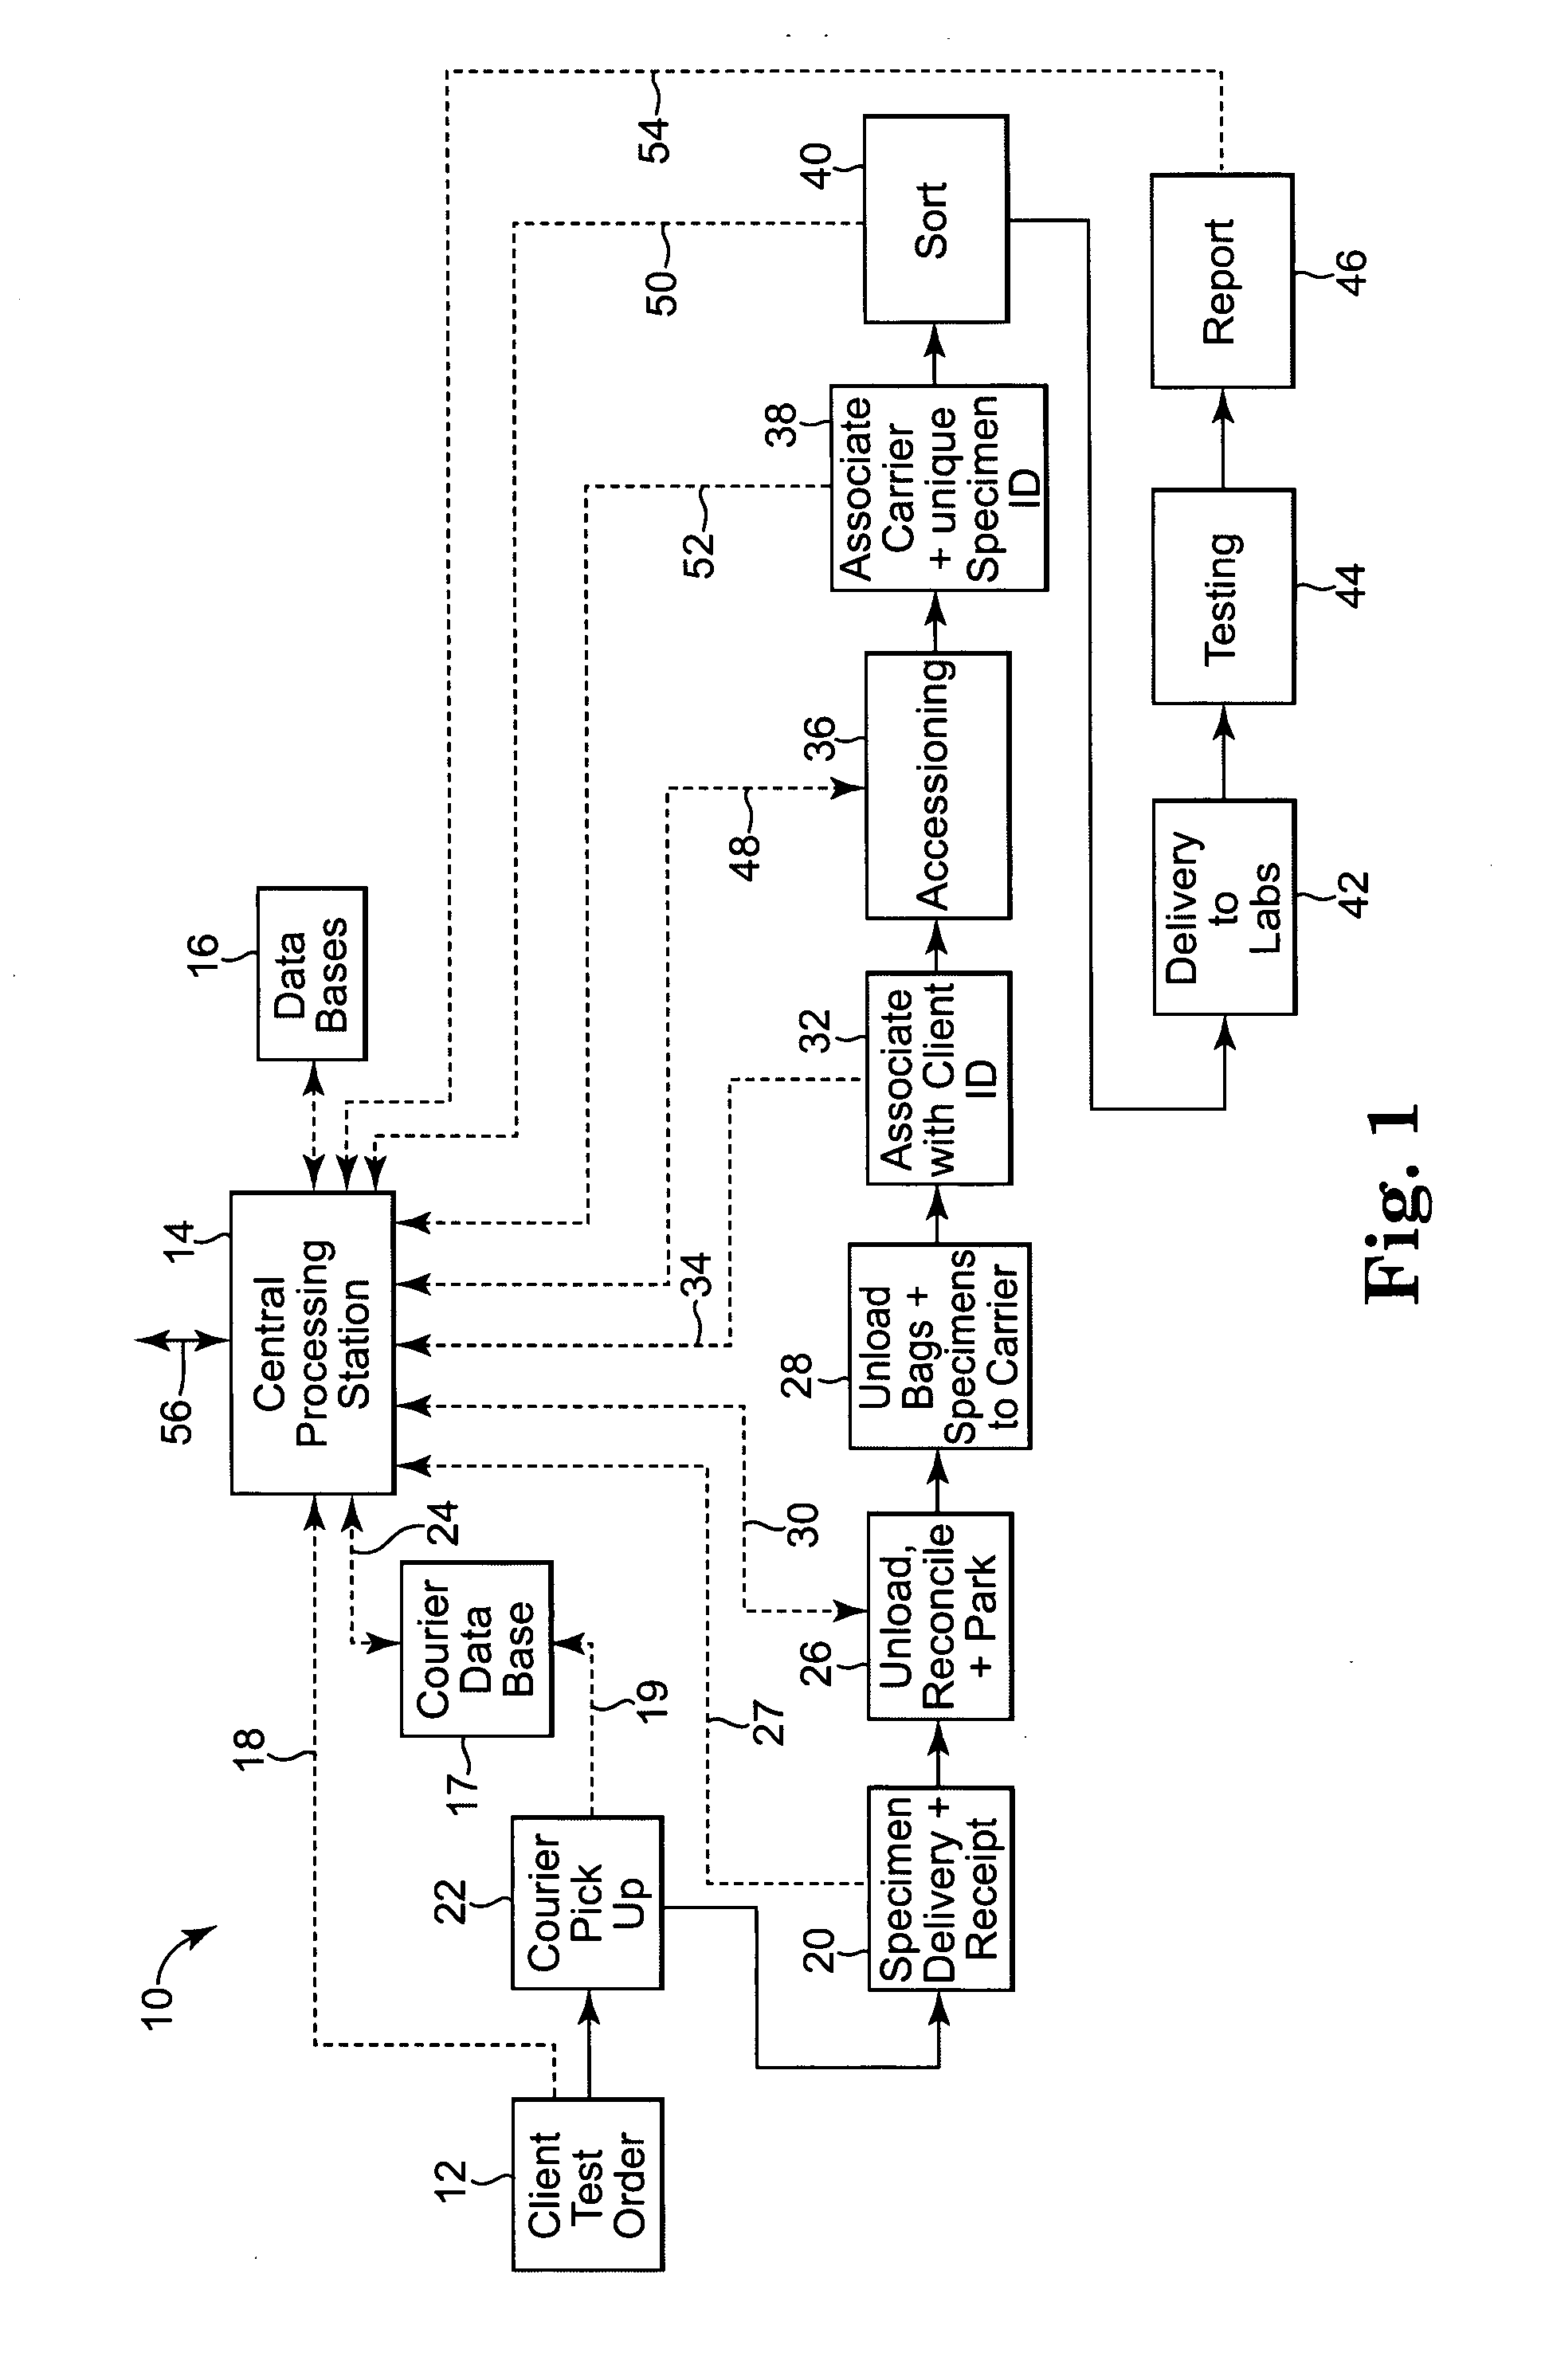 Automated systems for handling specimens for laboratory diagnostics and associating relevant information